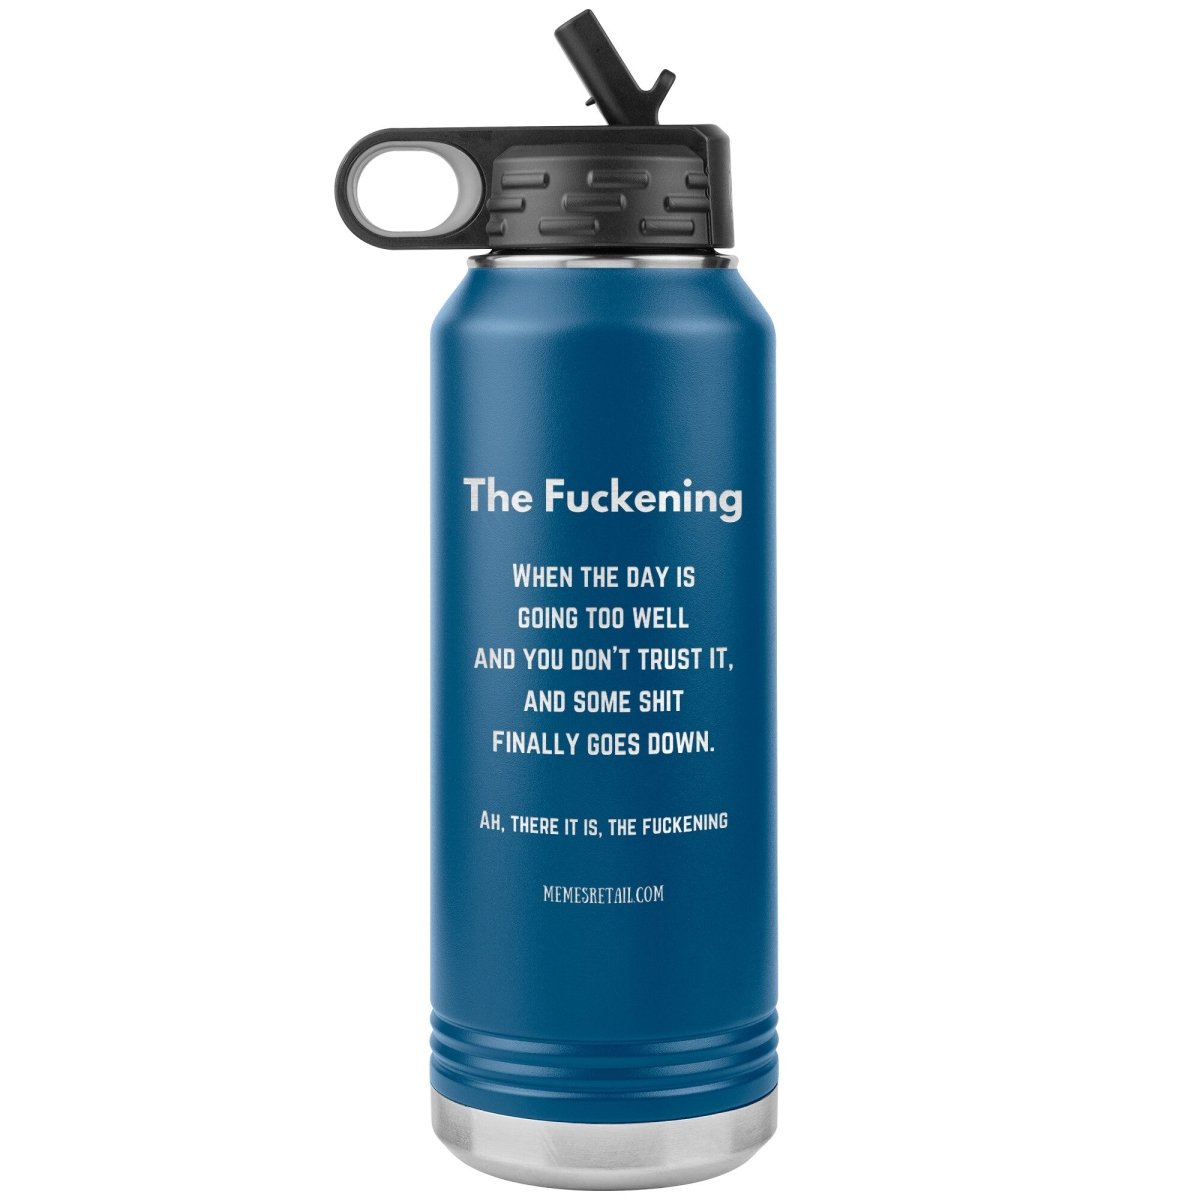 The Fuckening, When you don't trust the day. 32 oz Water Bottle, Blue - MemesRetail.com